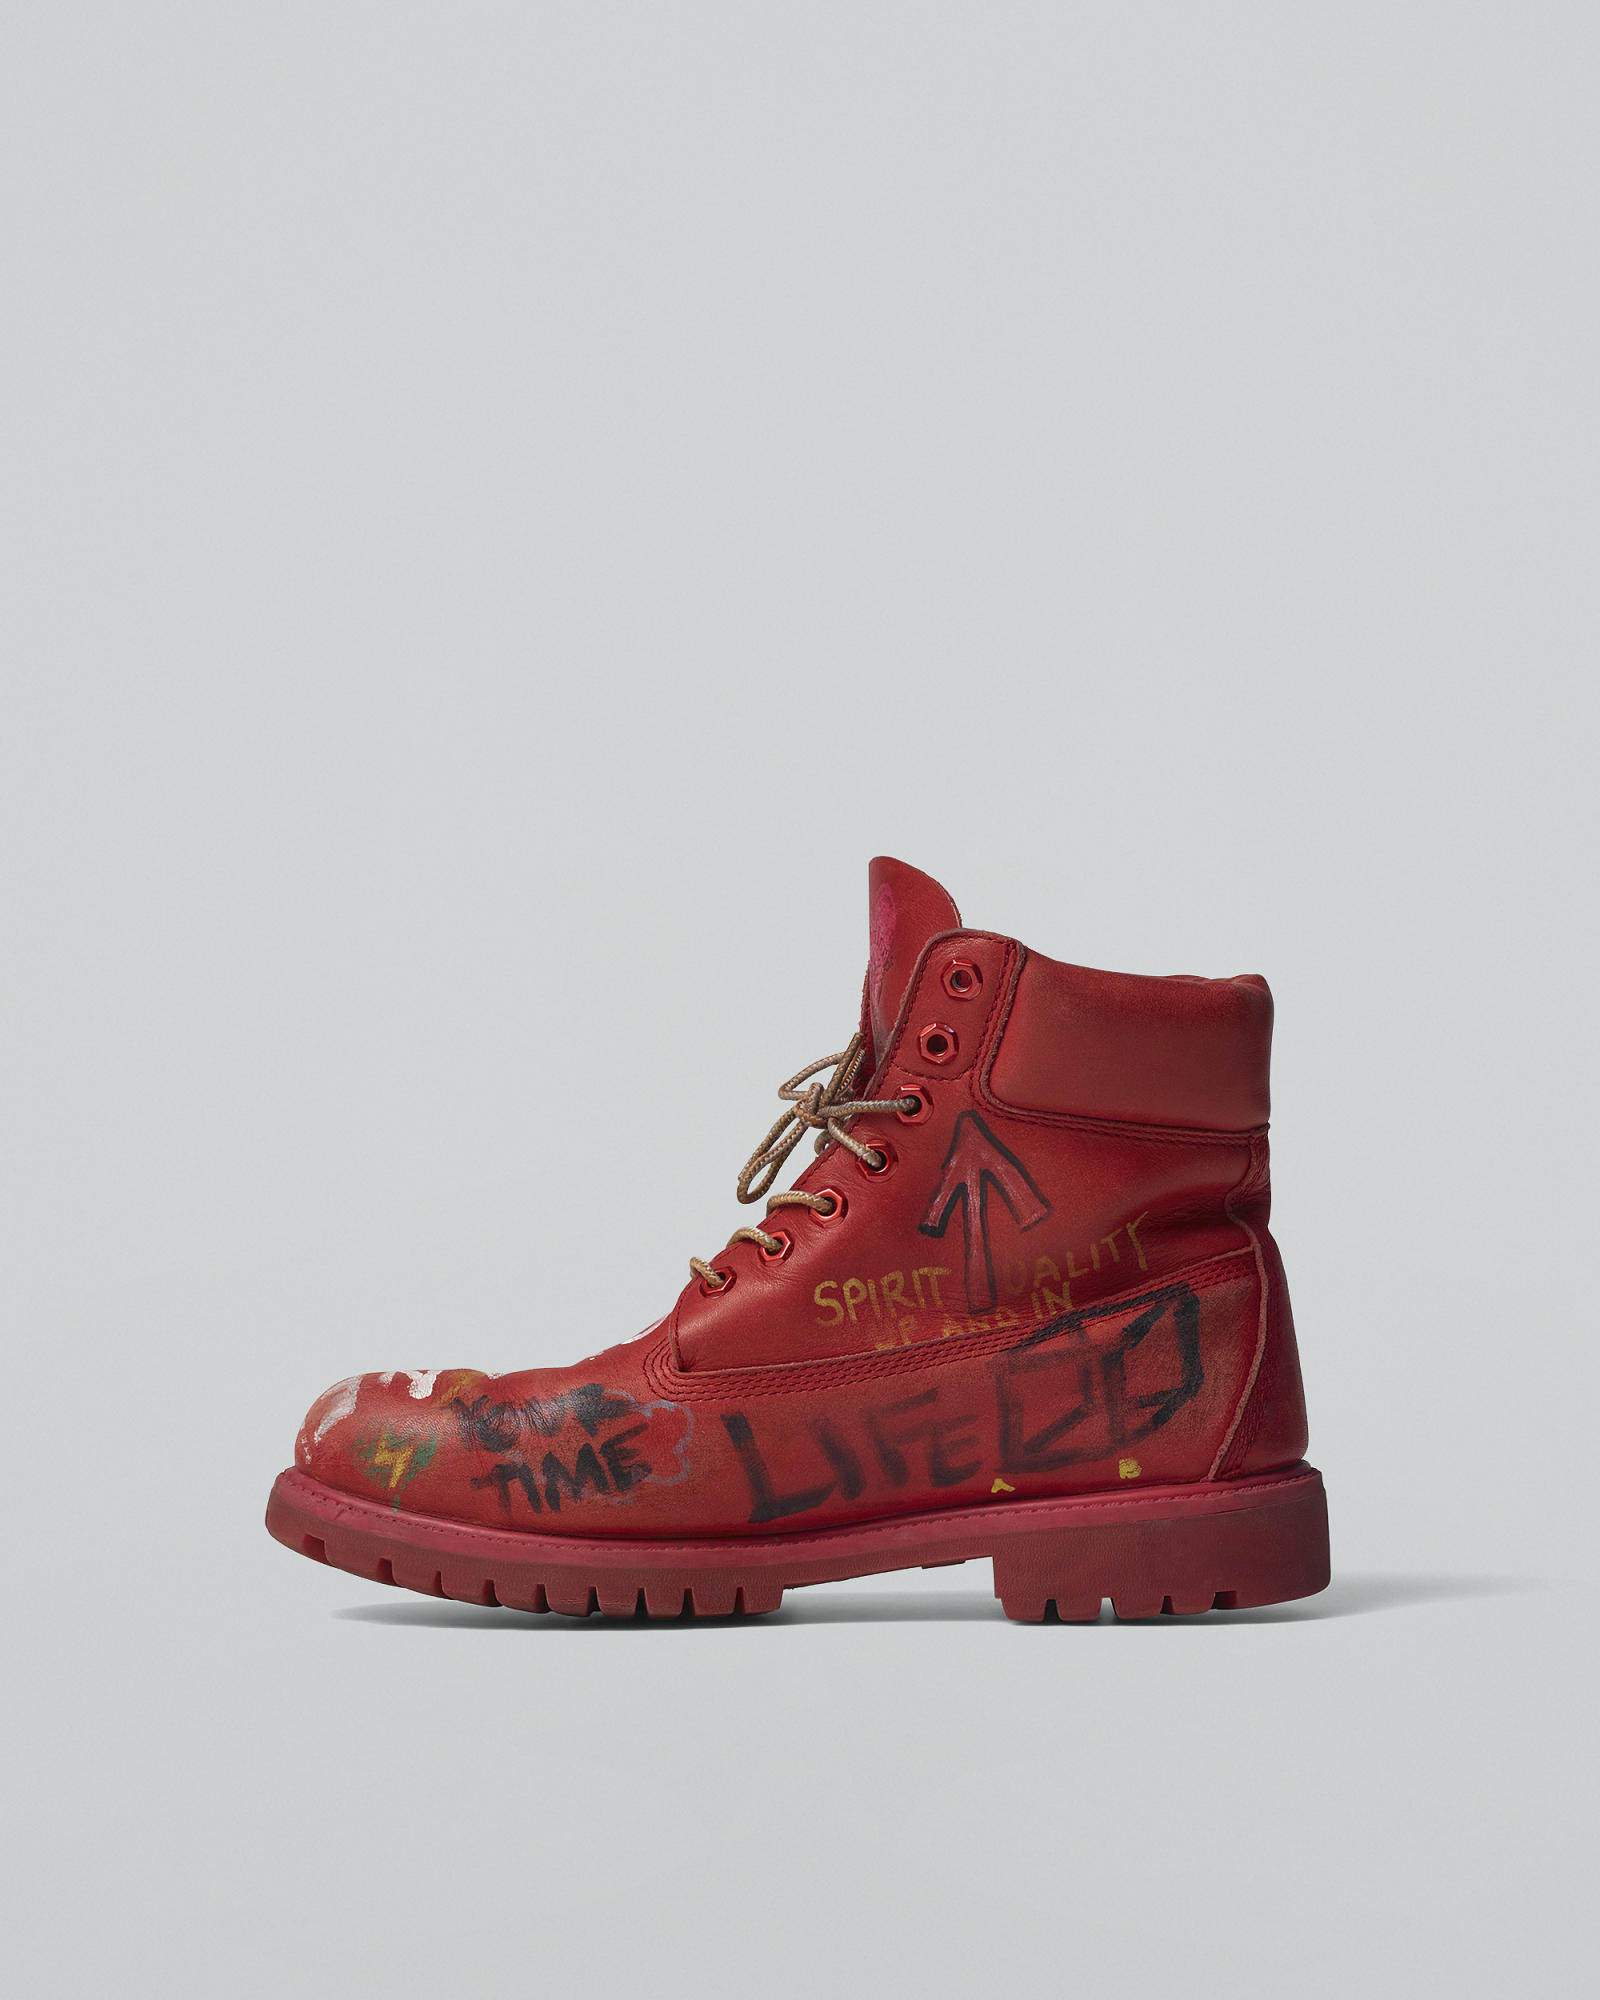 Bee-Line-Timberland-6-inch-Red-with-Hand-Drawn-Artwork-4